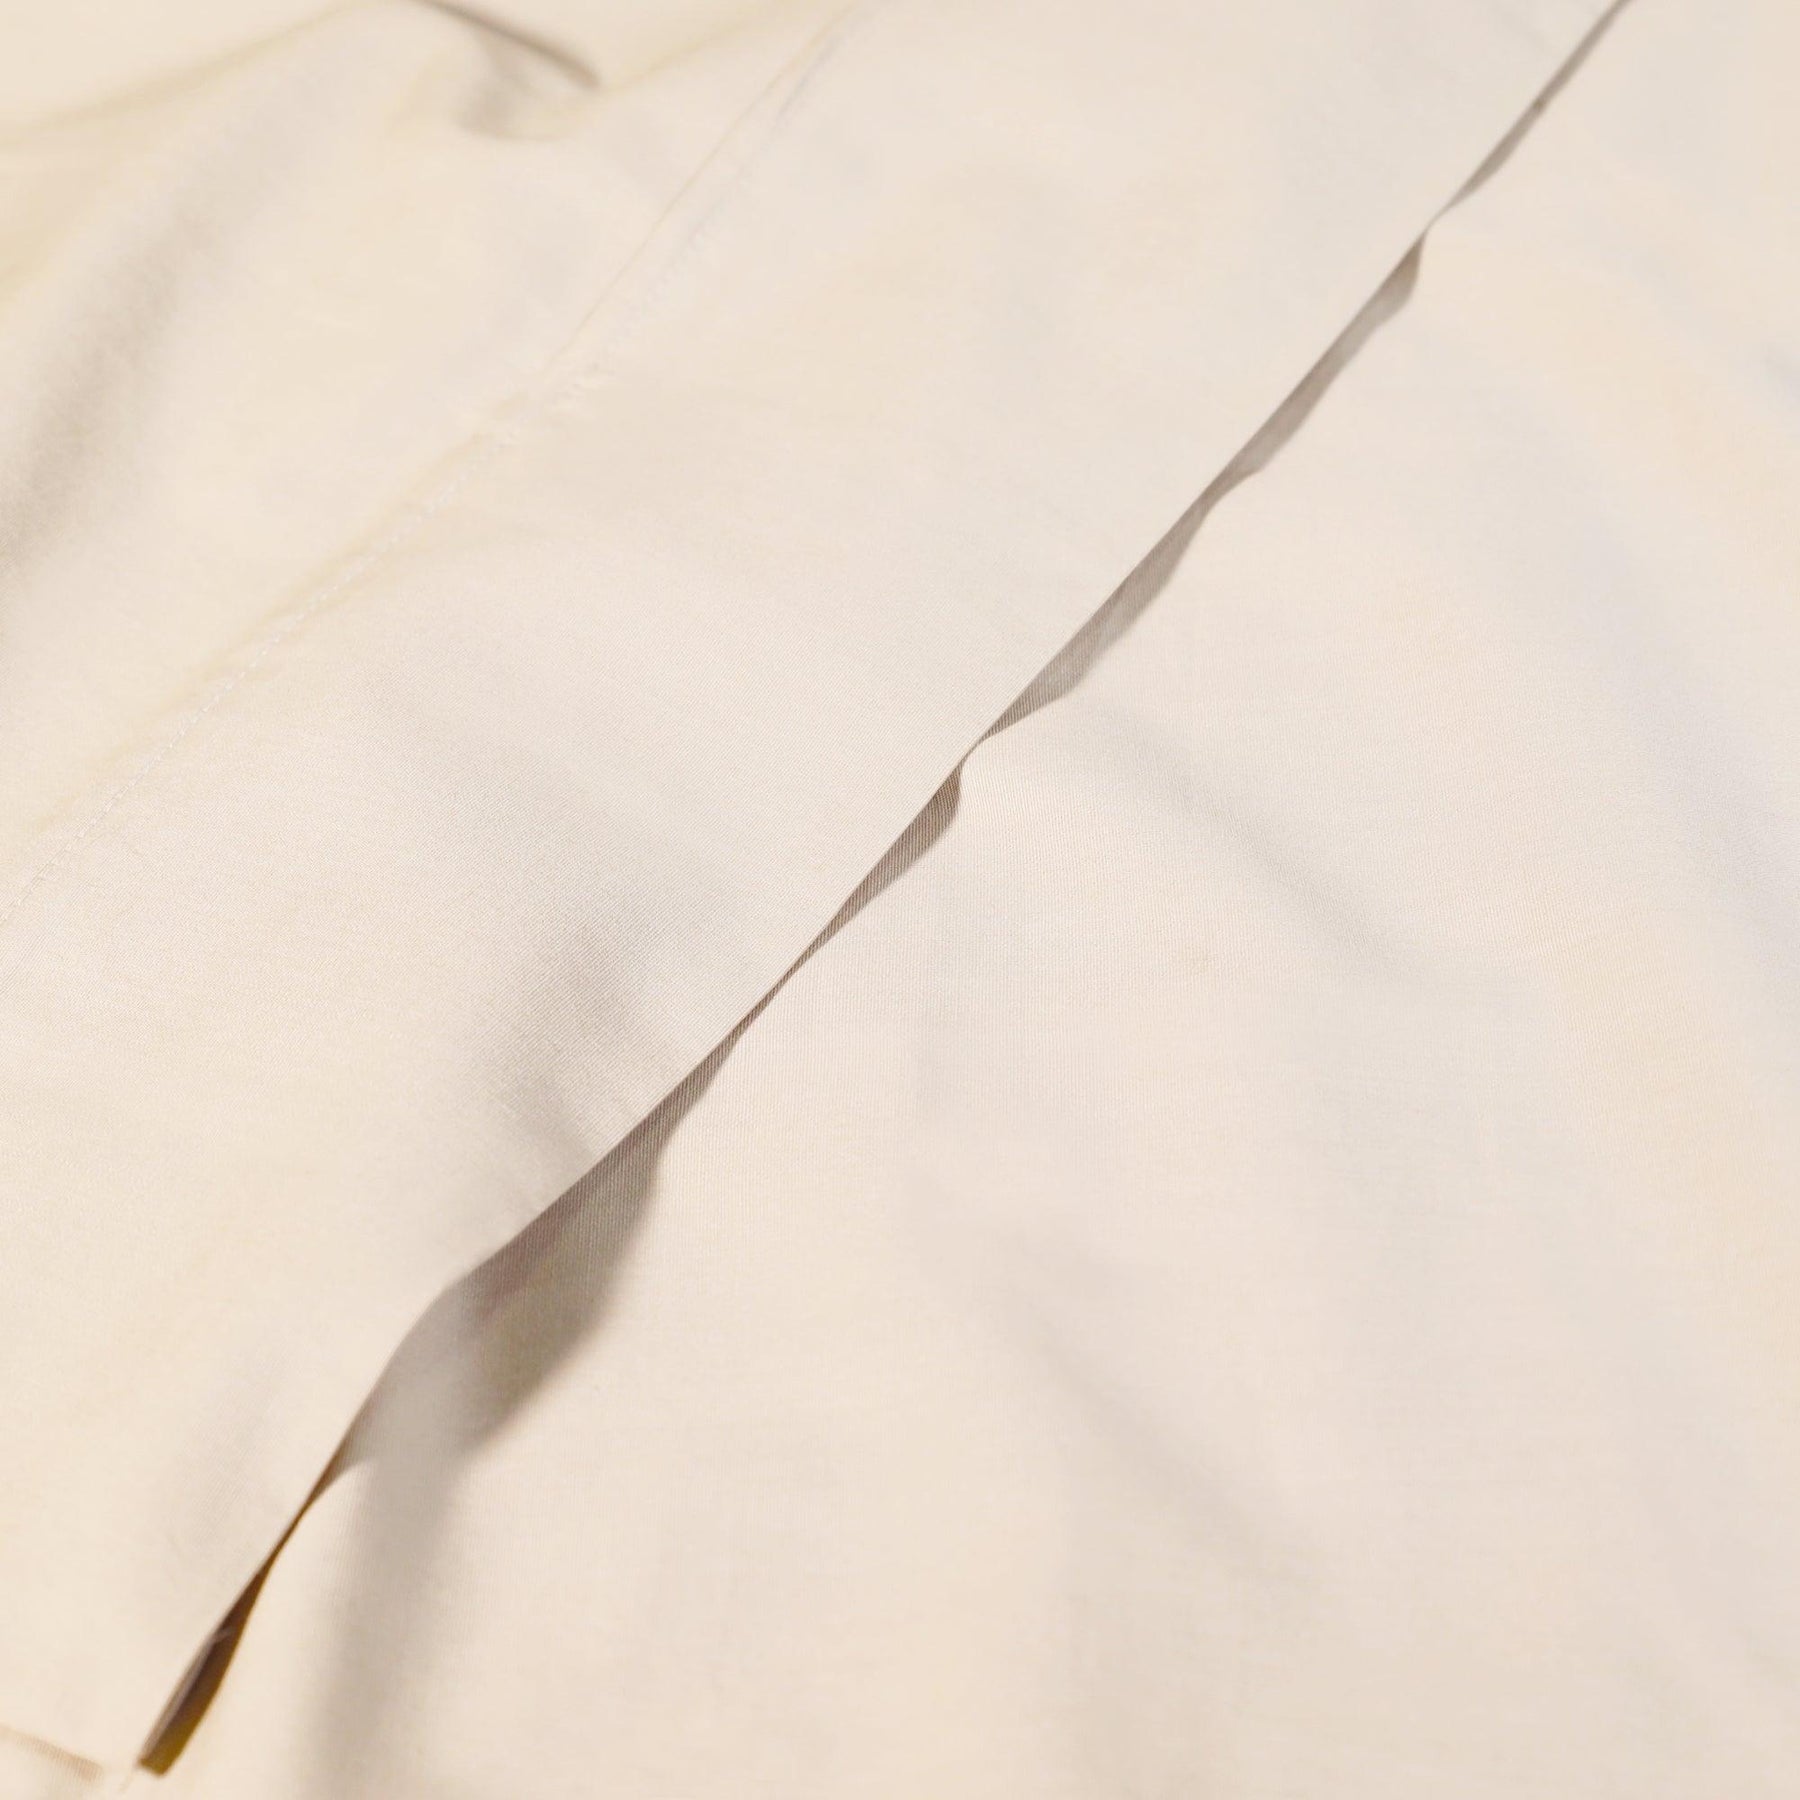 Superior 100% Cotton Percale 300 Thread Count Sheet Set - Ivory